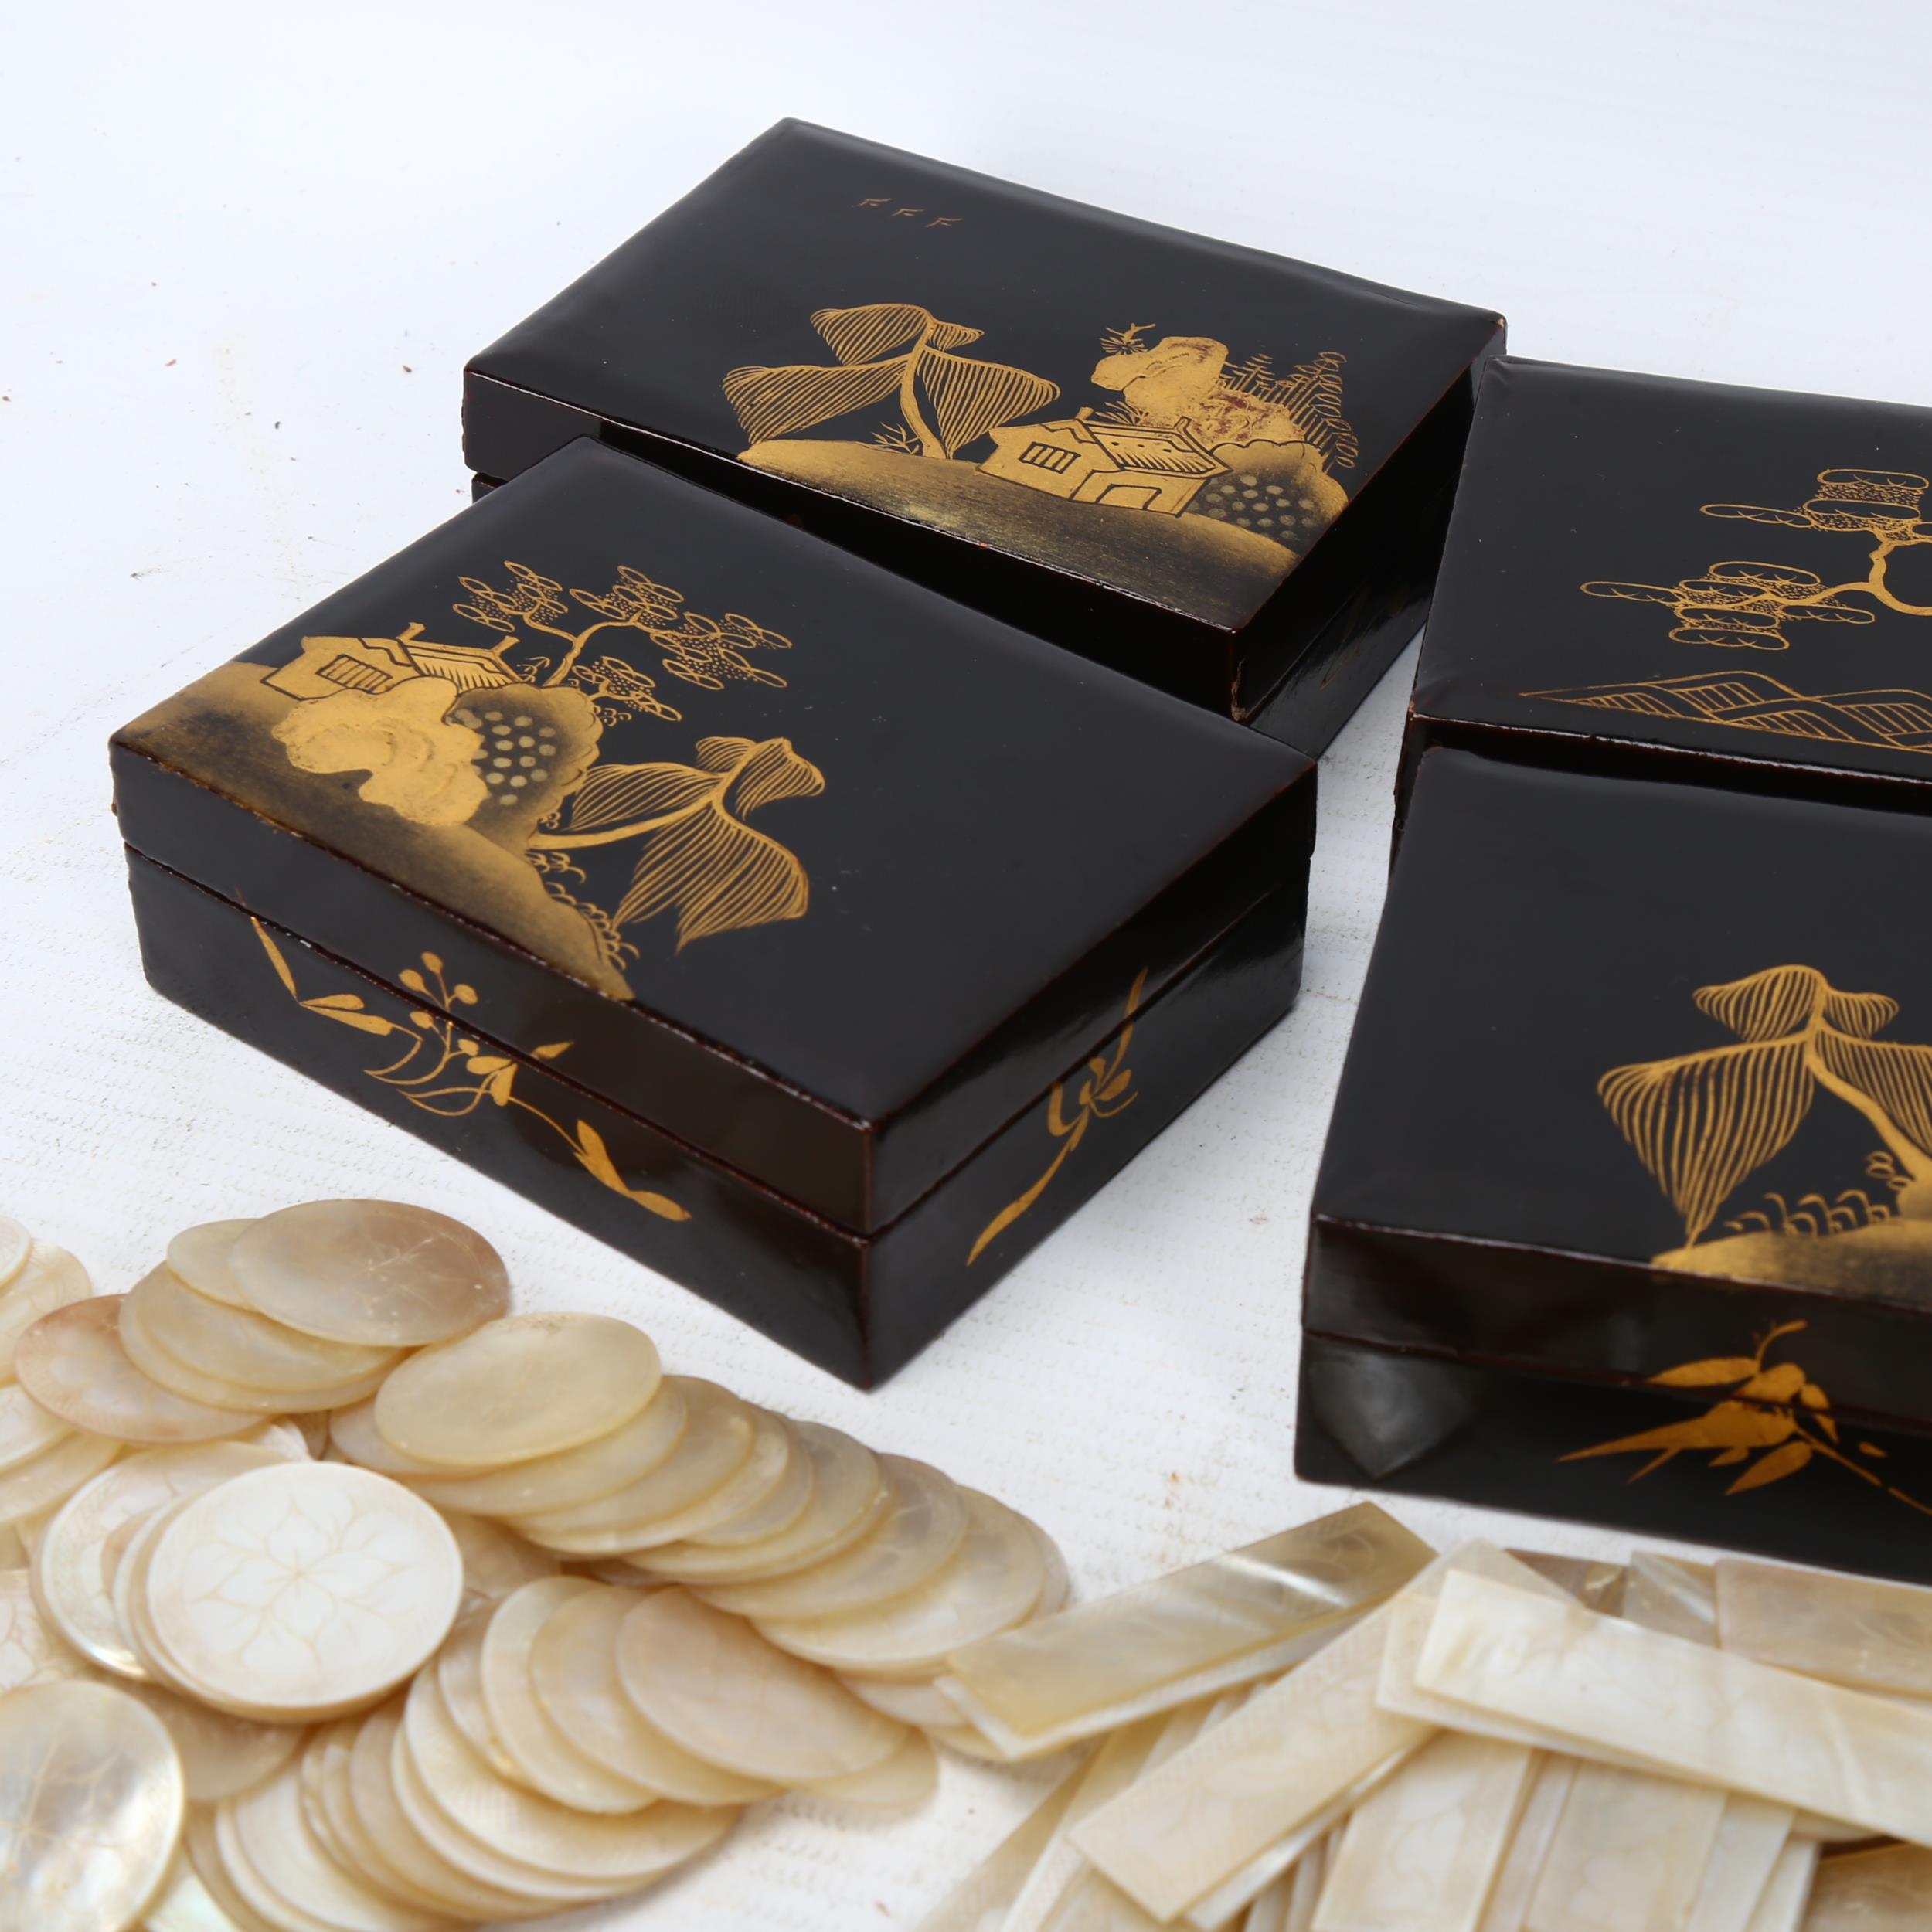 4 x 19th century Chinese gilded lacquer gaming boxes, containing a collection of mother-of-pearl - Image 3 of 3